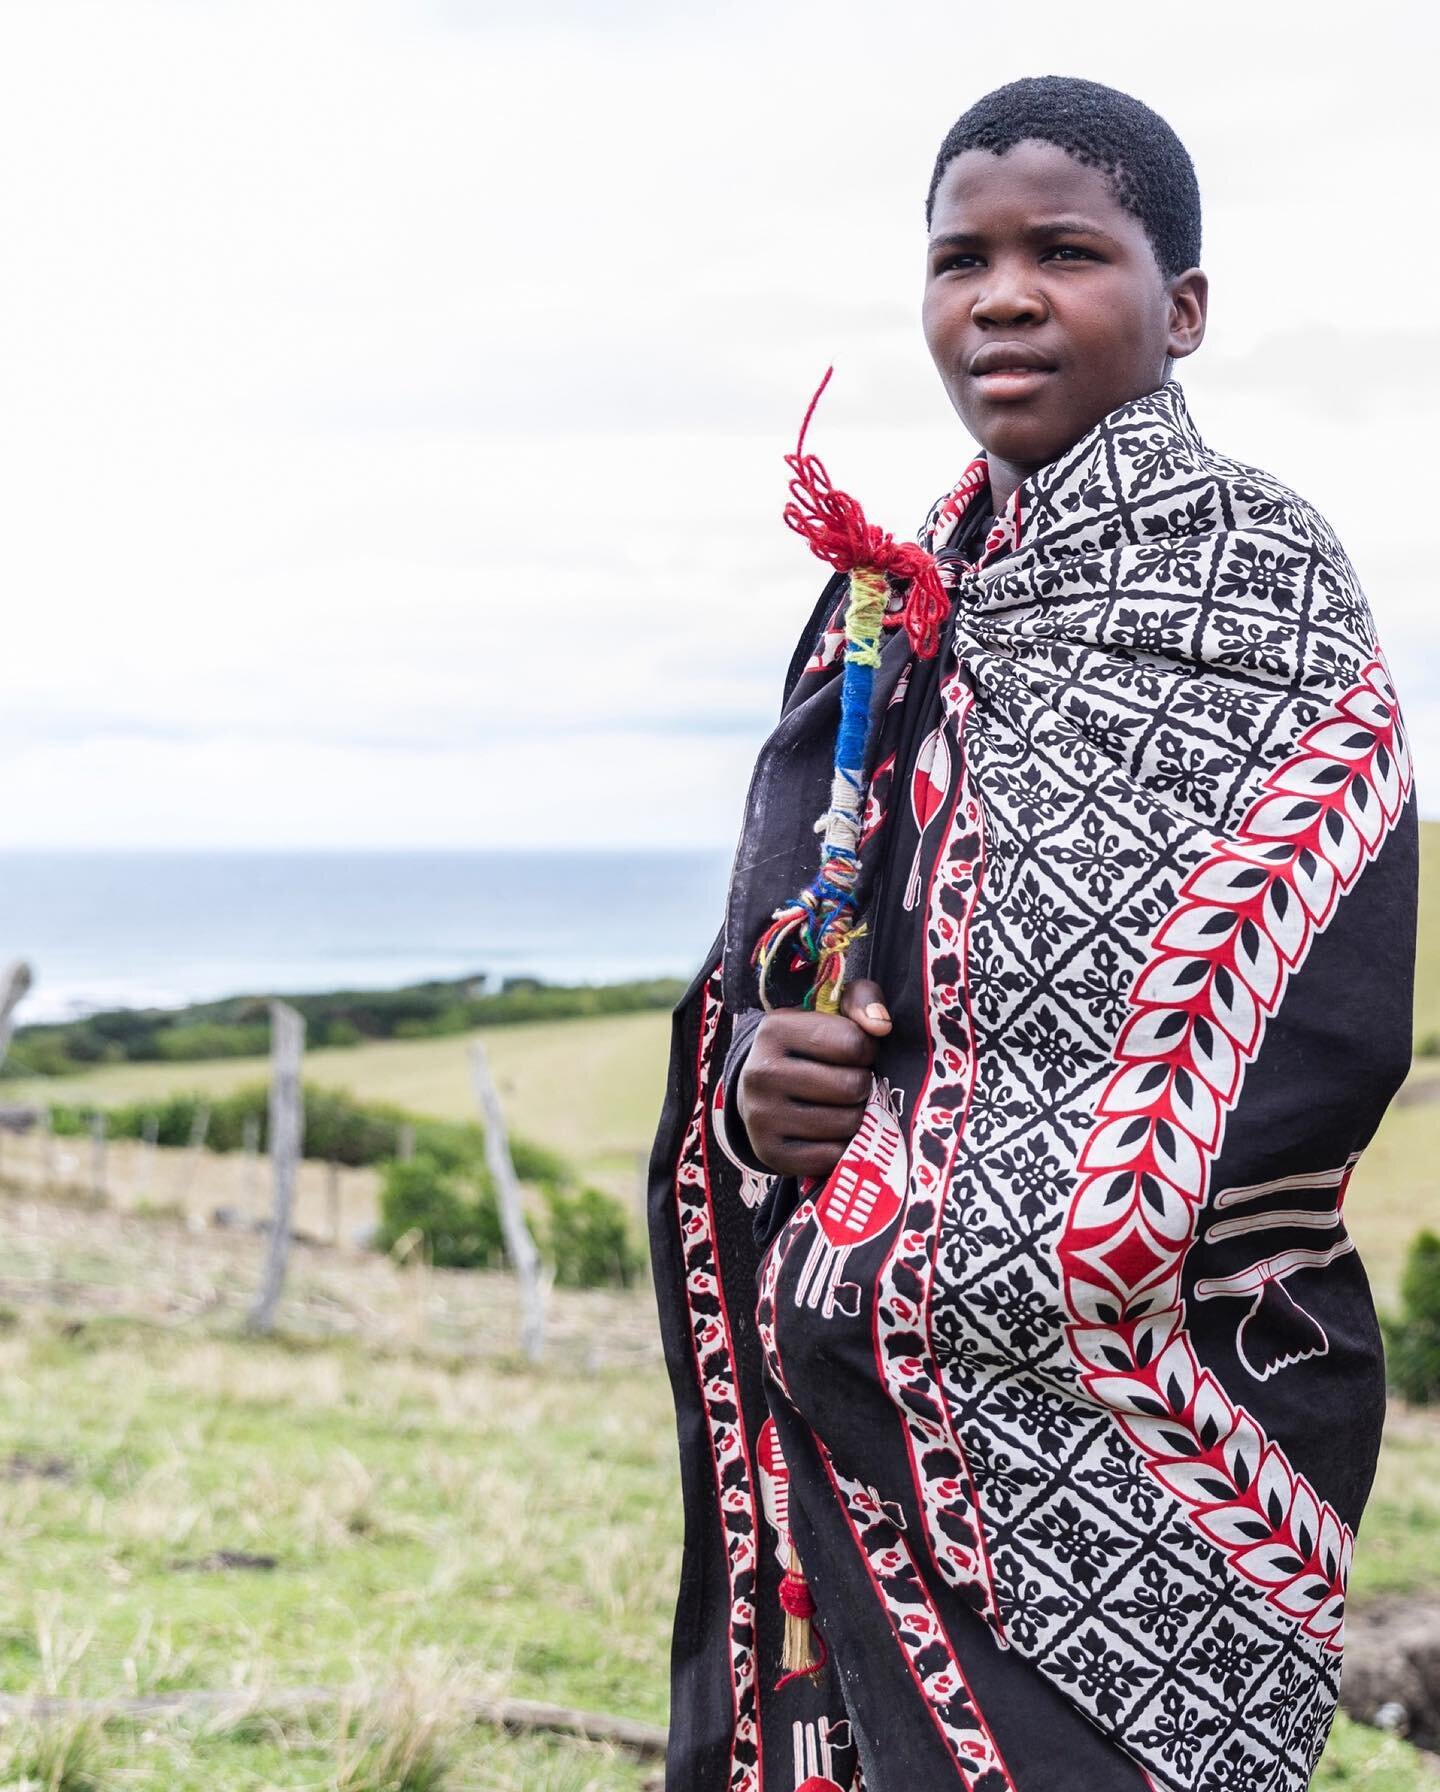 Daily life at Bulungula Lodge, a community-owned eco-lodge on the windswept Eastern Coast of South Africa. A place that sustains local culture and is 100 per cent owned and managed by the vibrant, traditional Nqileni village, a Xhosa community. 

All